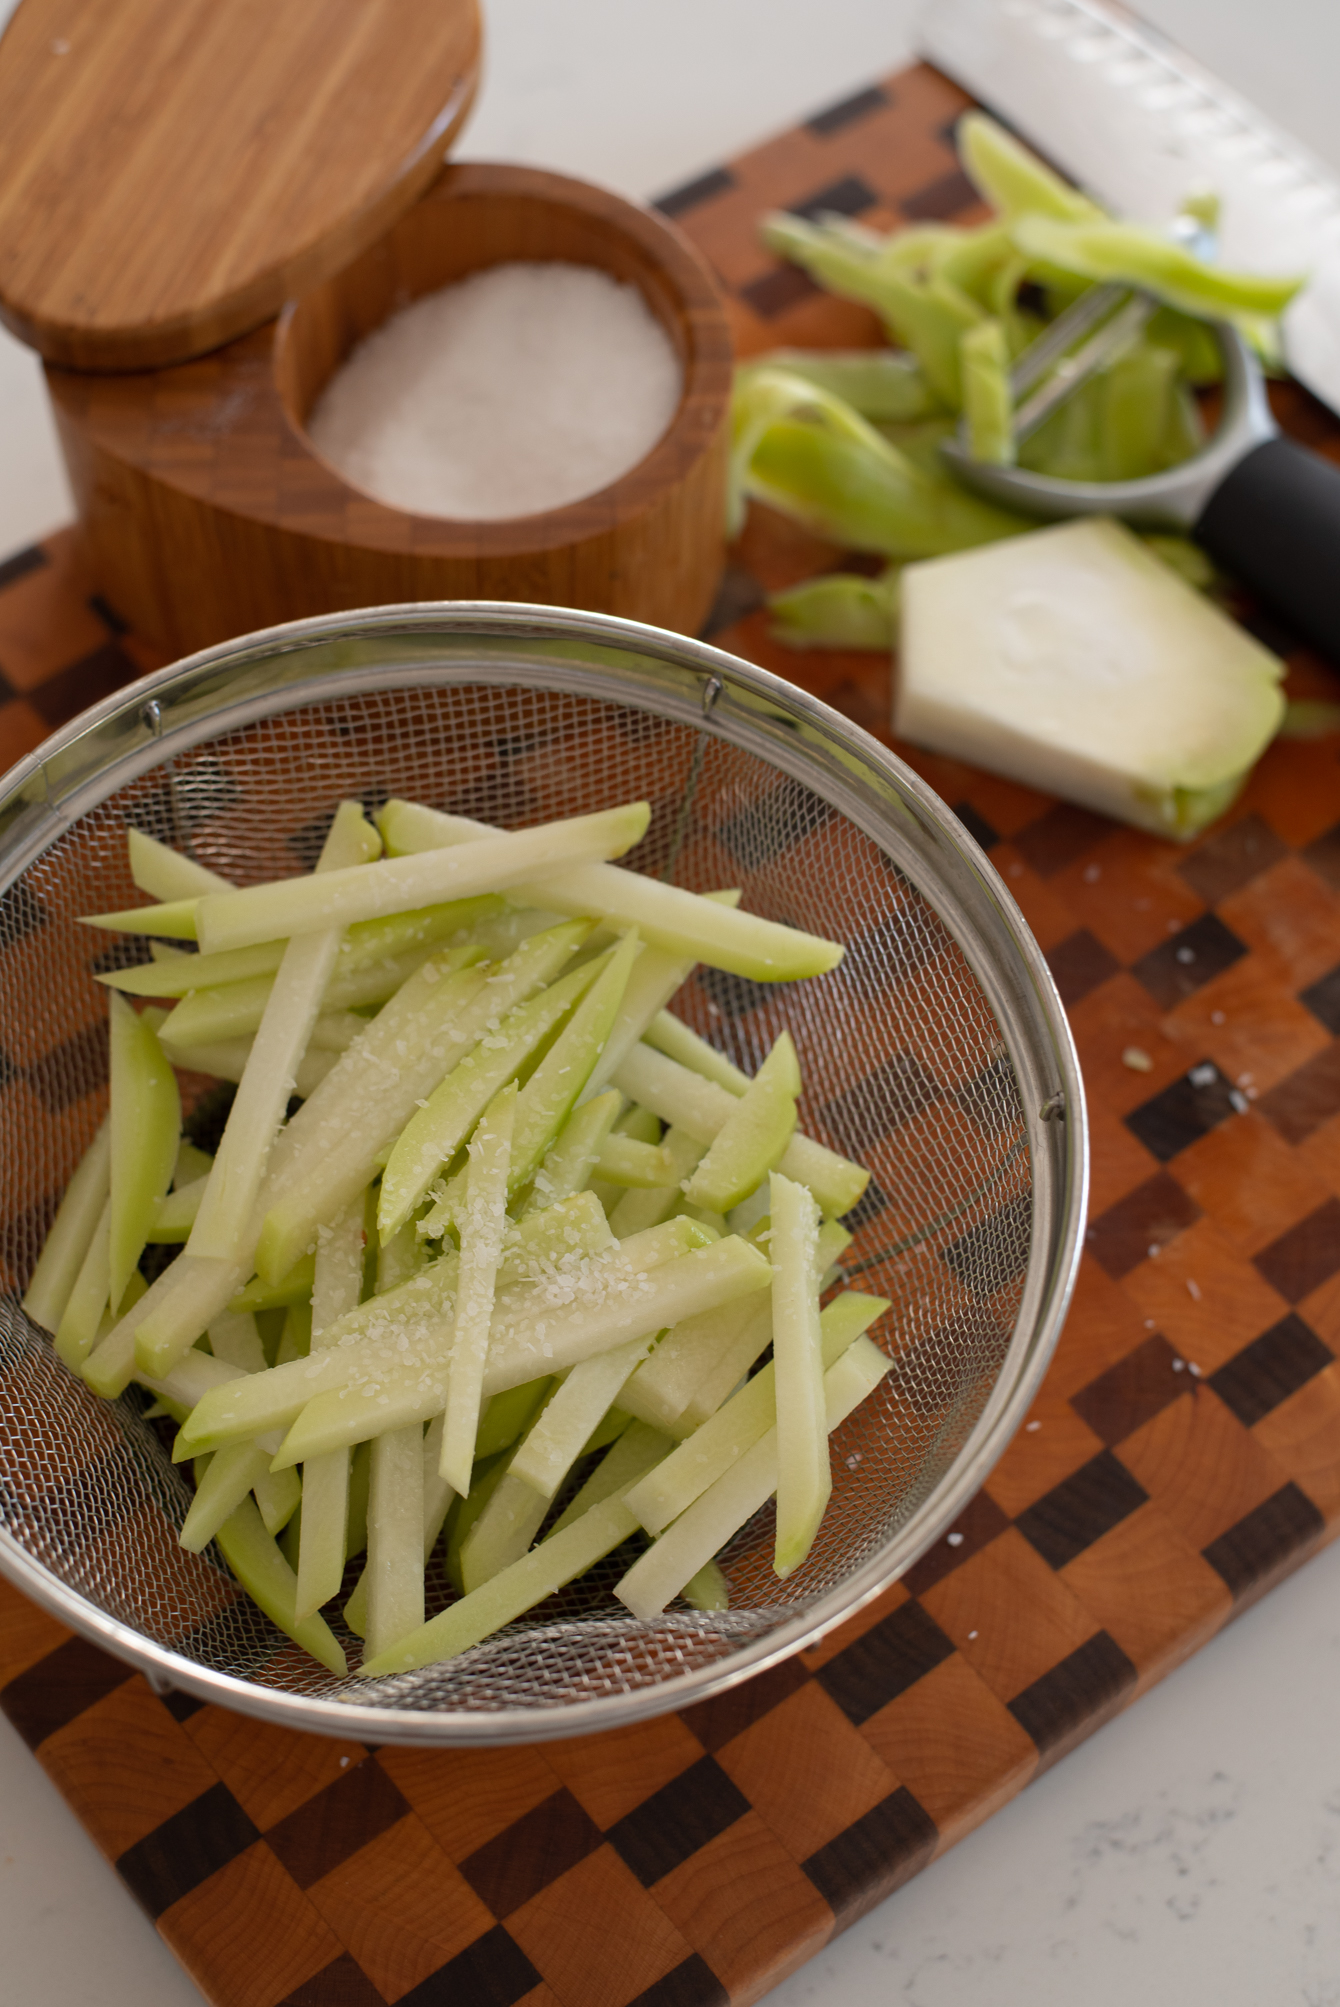 Sliced chayote vegetable needs salt to get rid of sliminess.